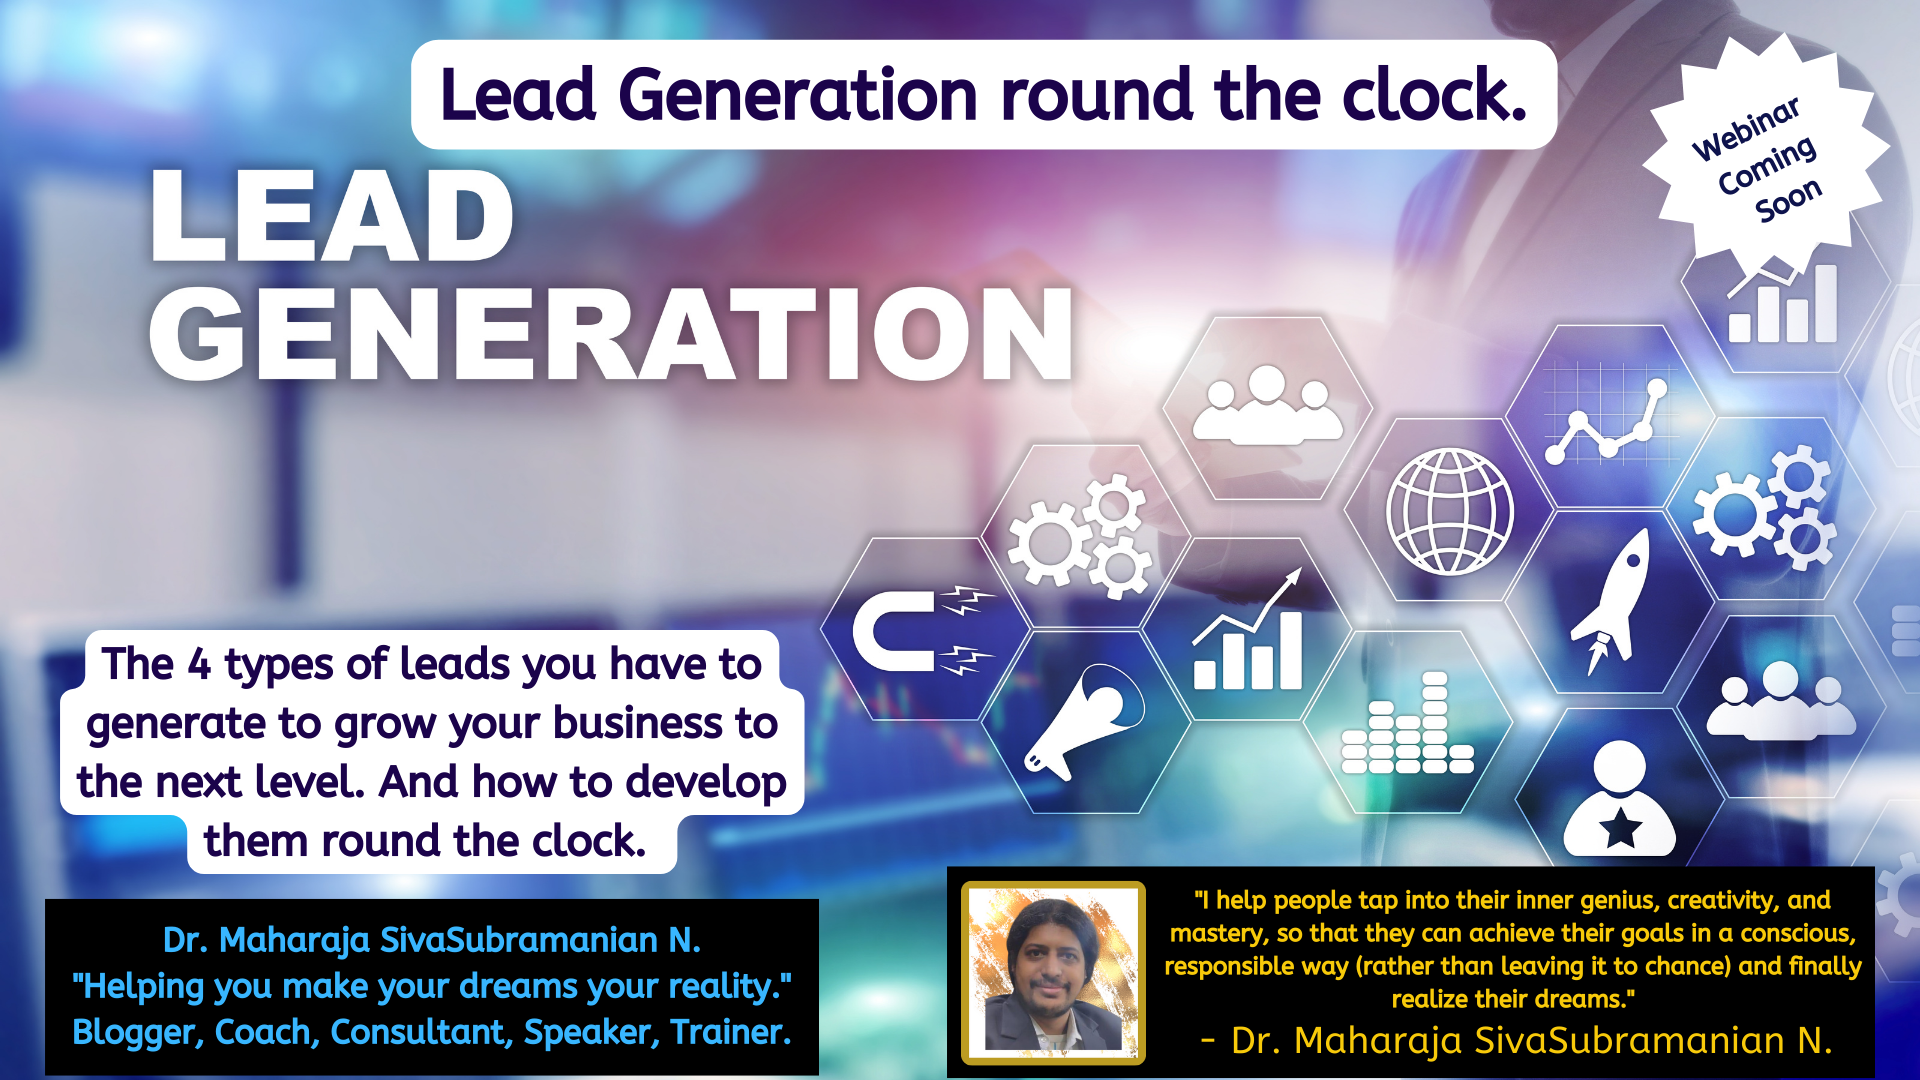 Lead Generation round the clock for Event Planners. – Upcoming free webinar.